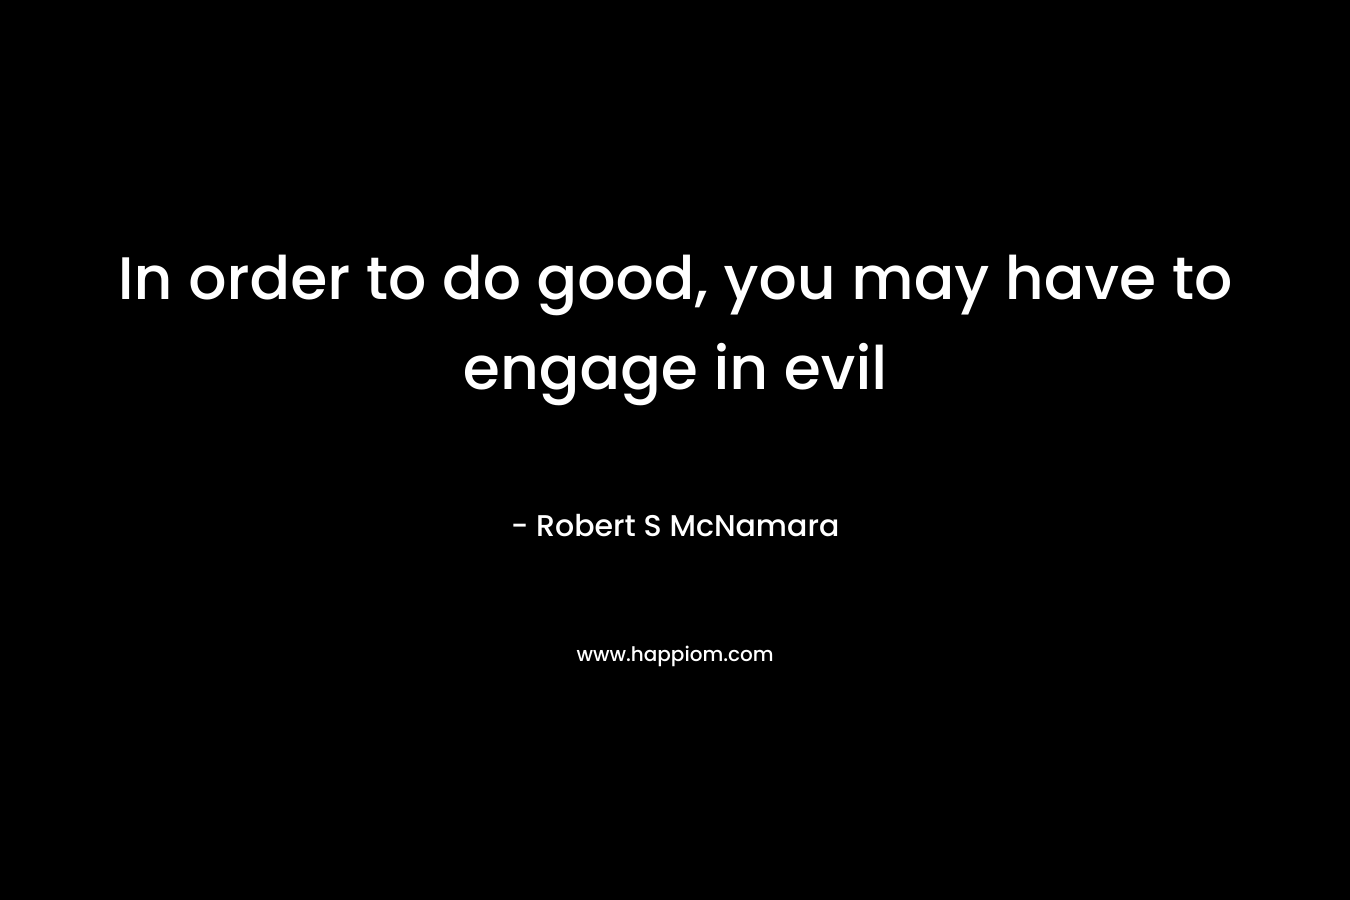 In order to do good, you may have to engage in evil